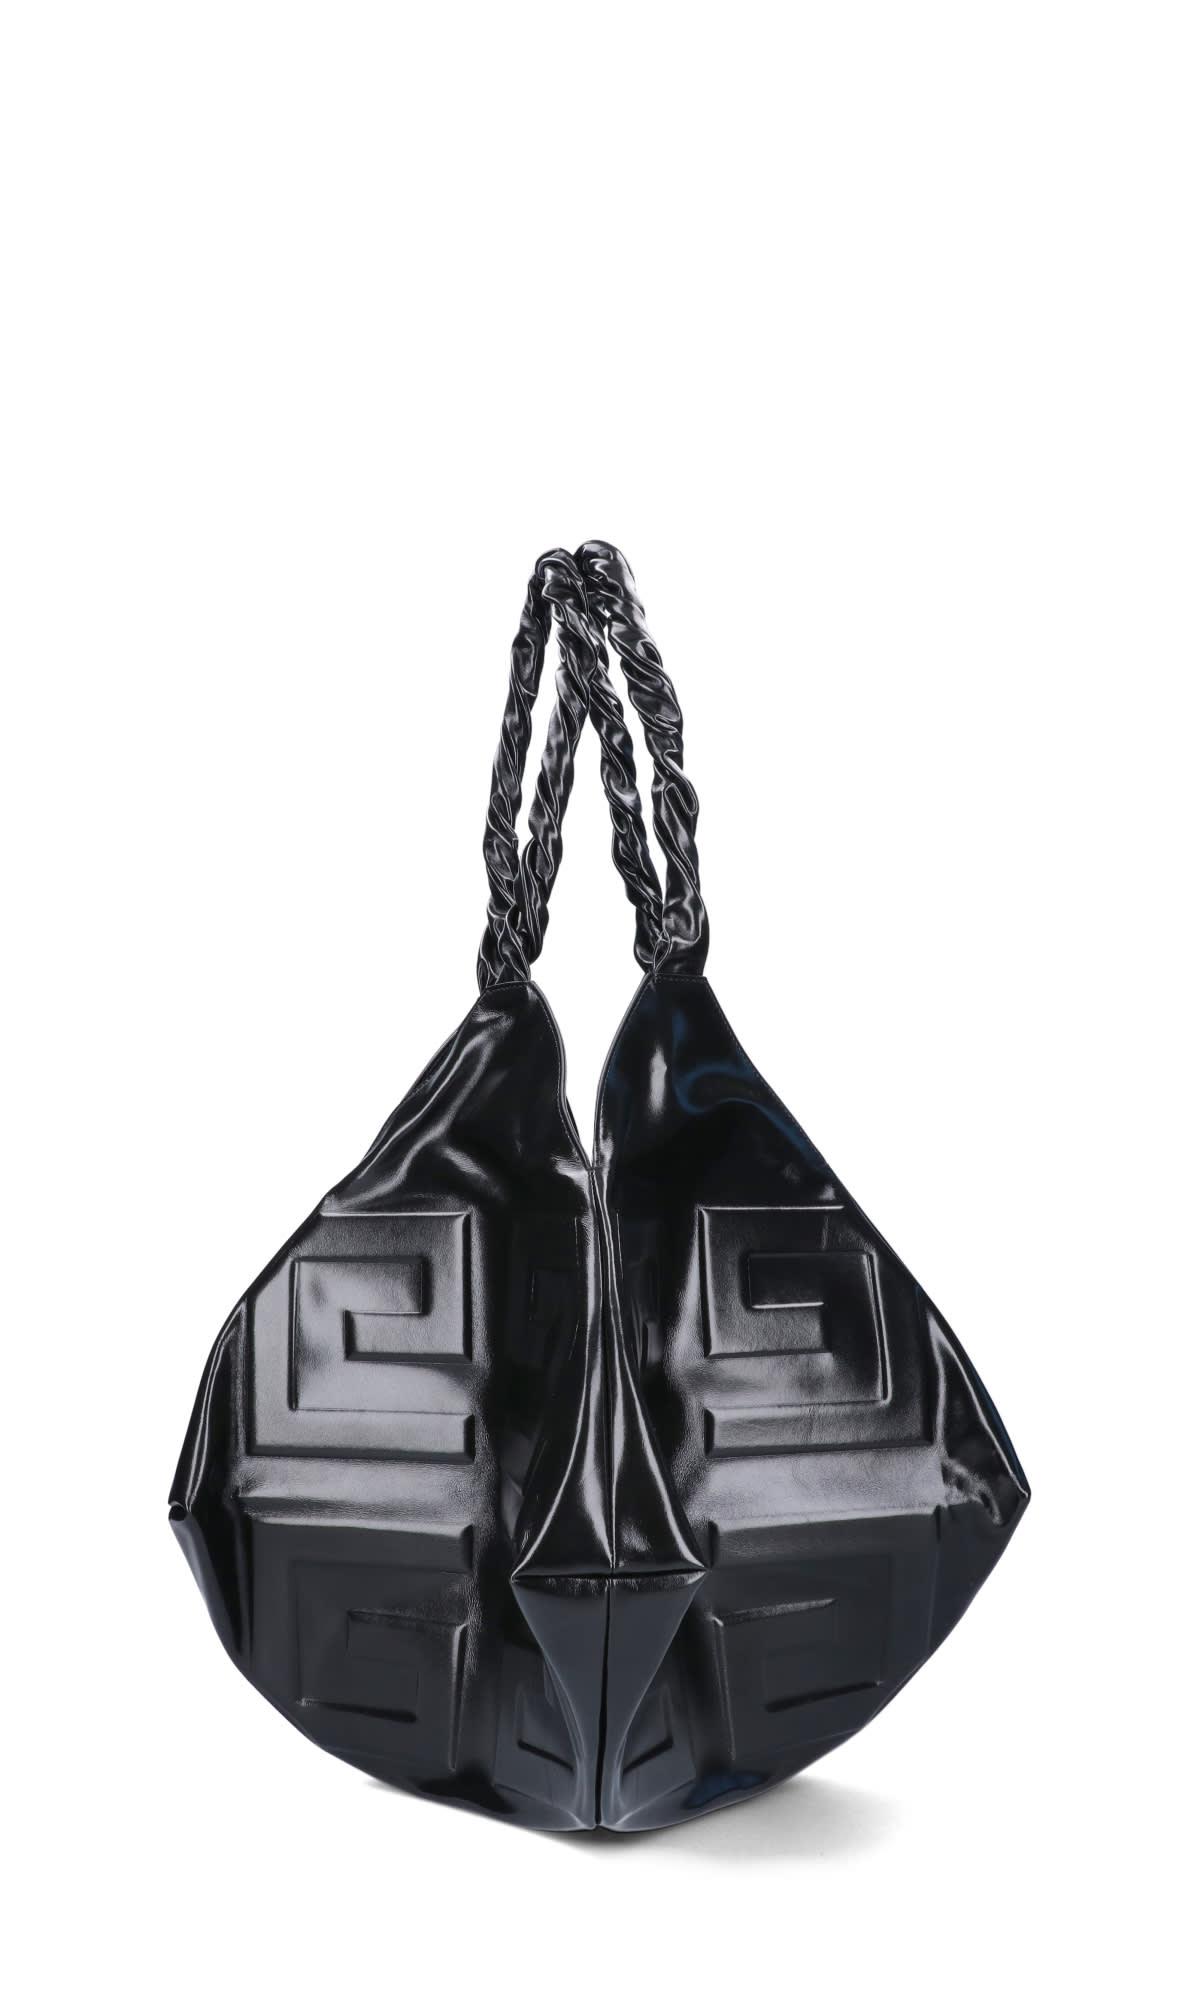 Givenchy Tote In Black